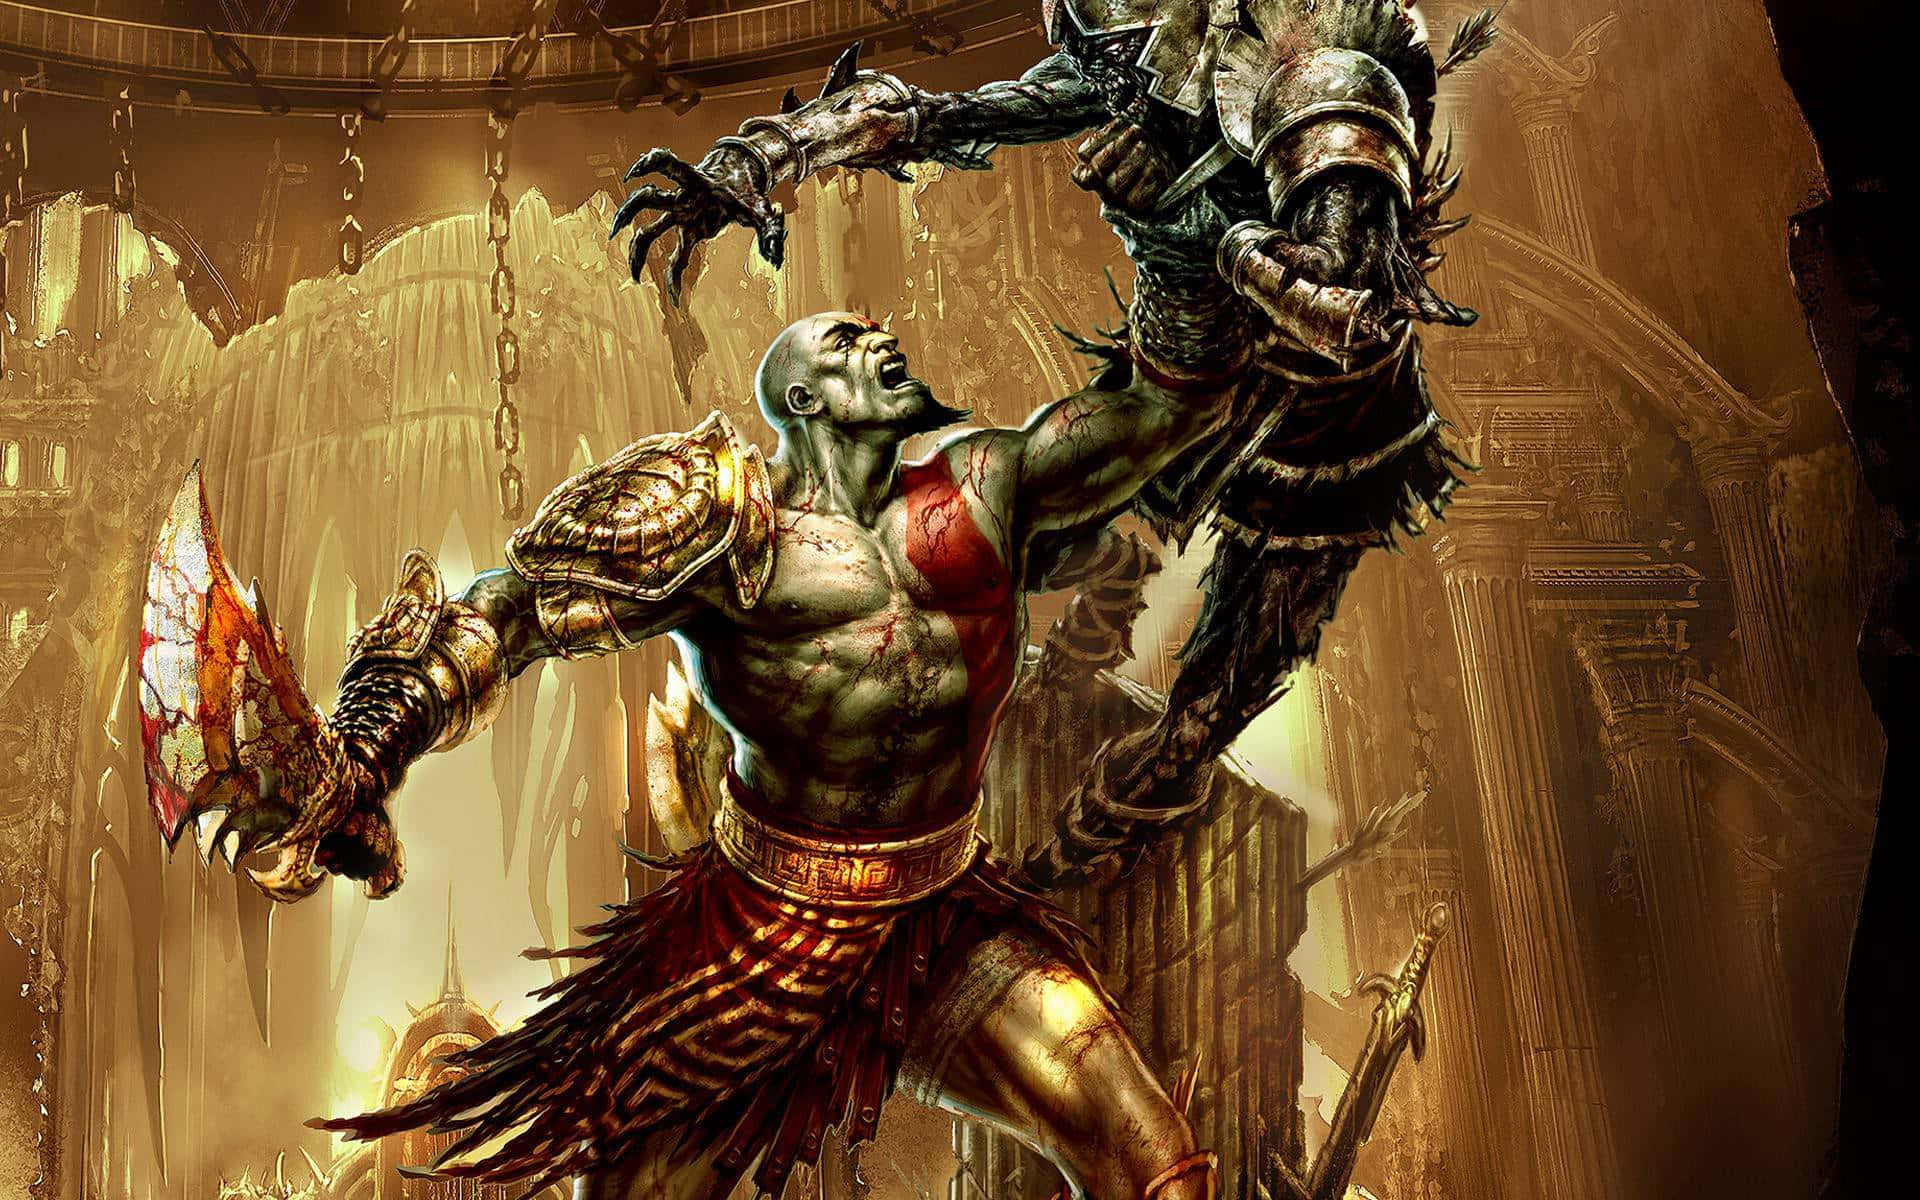 Caption: Kratos, the mighty Spartan warrior, in action within the iconic world of God of War